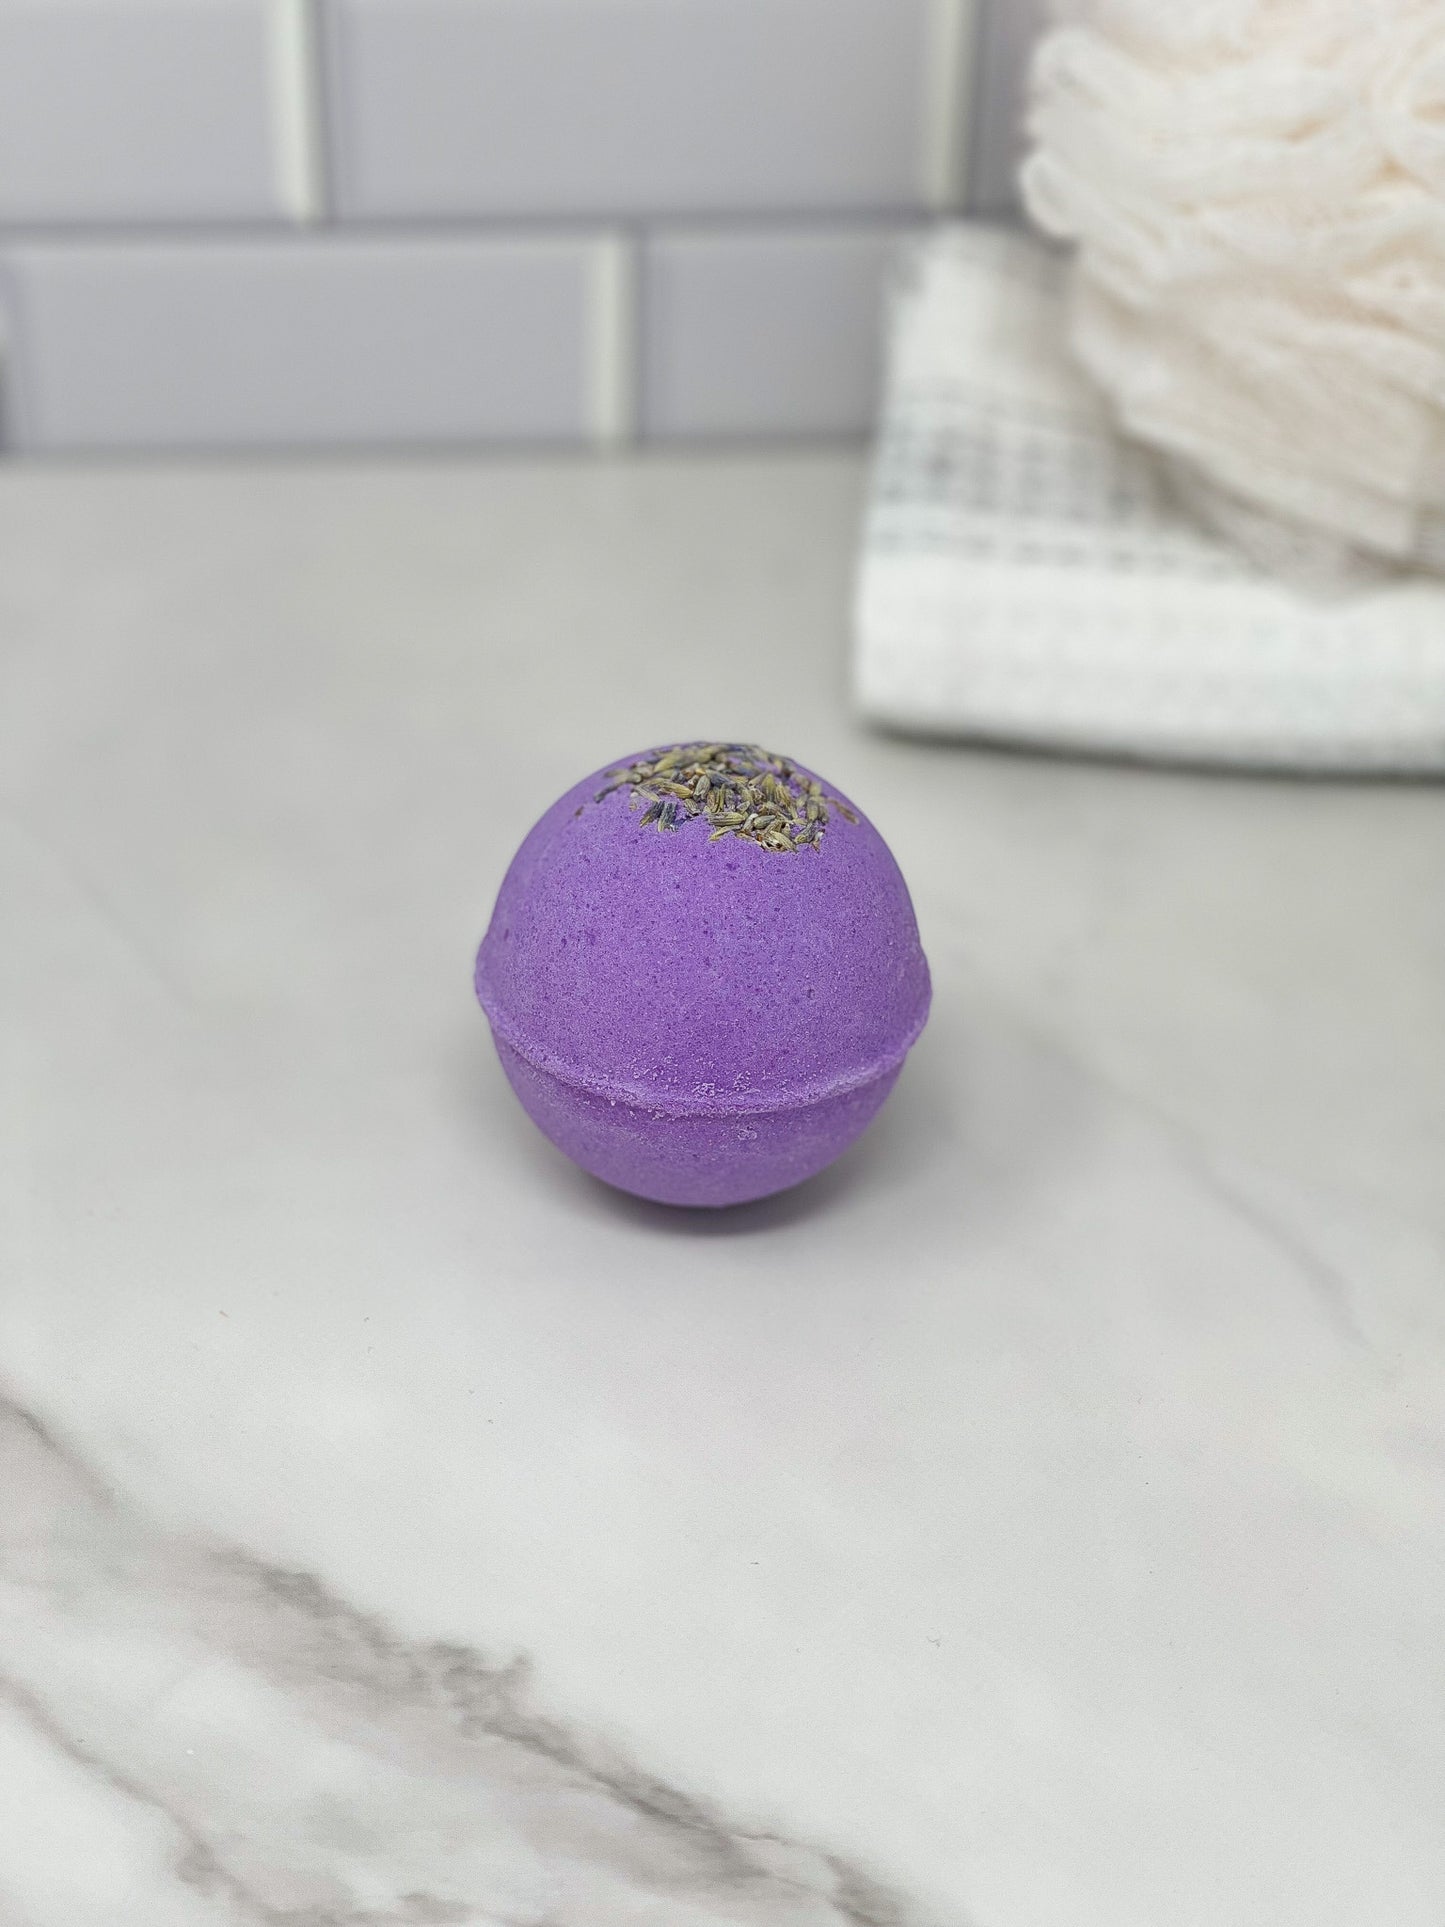 Lavender Bath Bomb - Made with Essential Oil